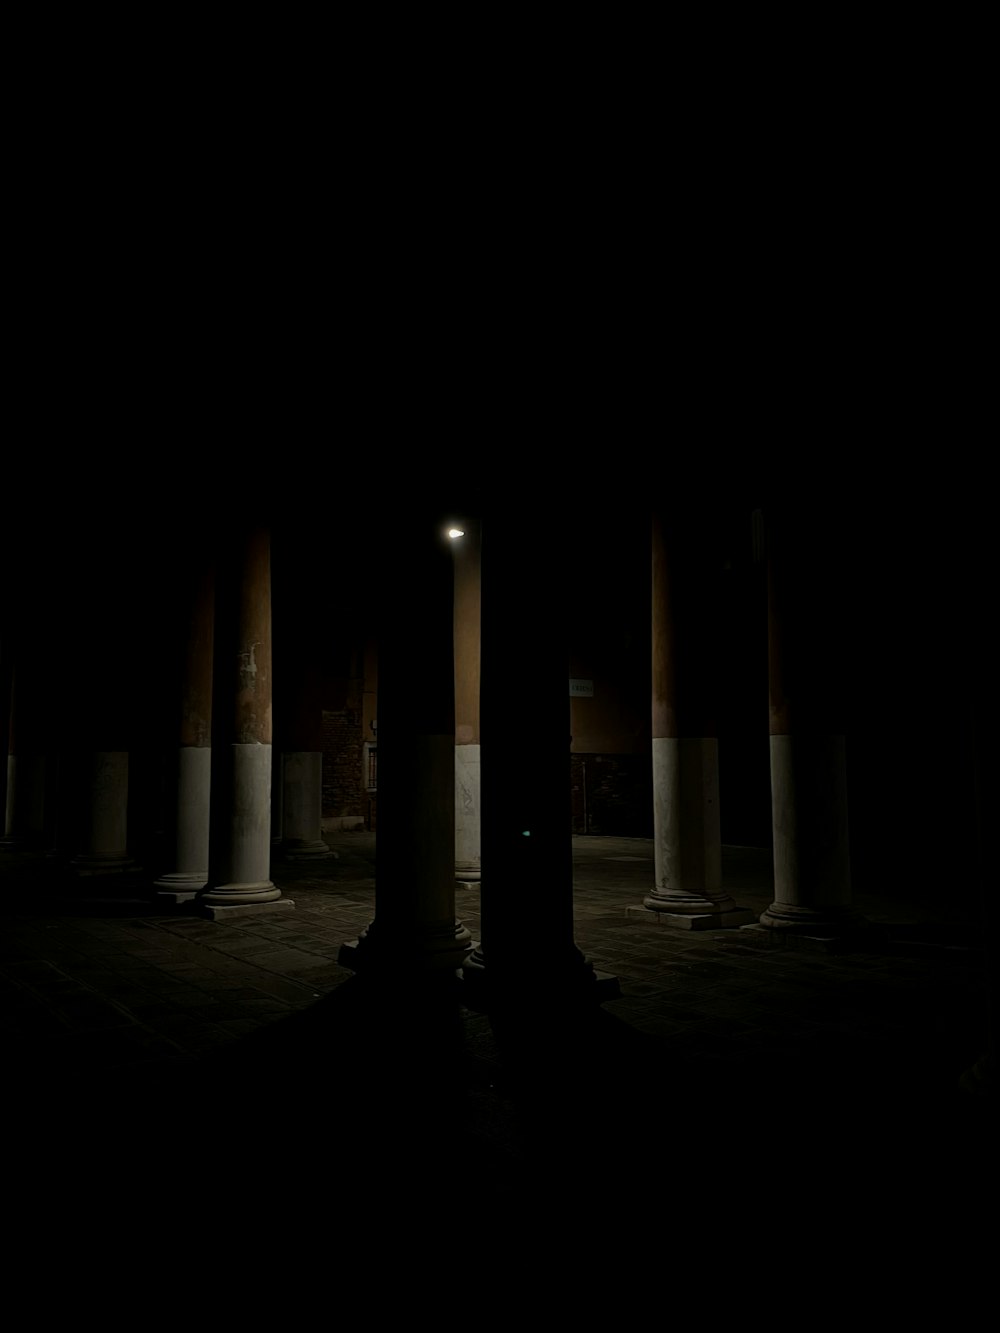 a dark room with columns and a street light